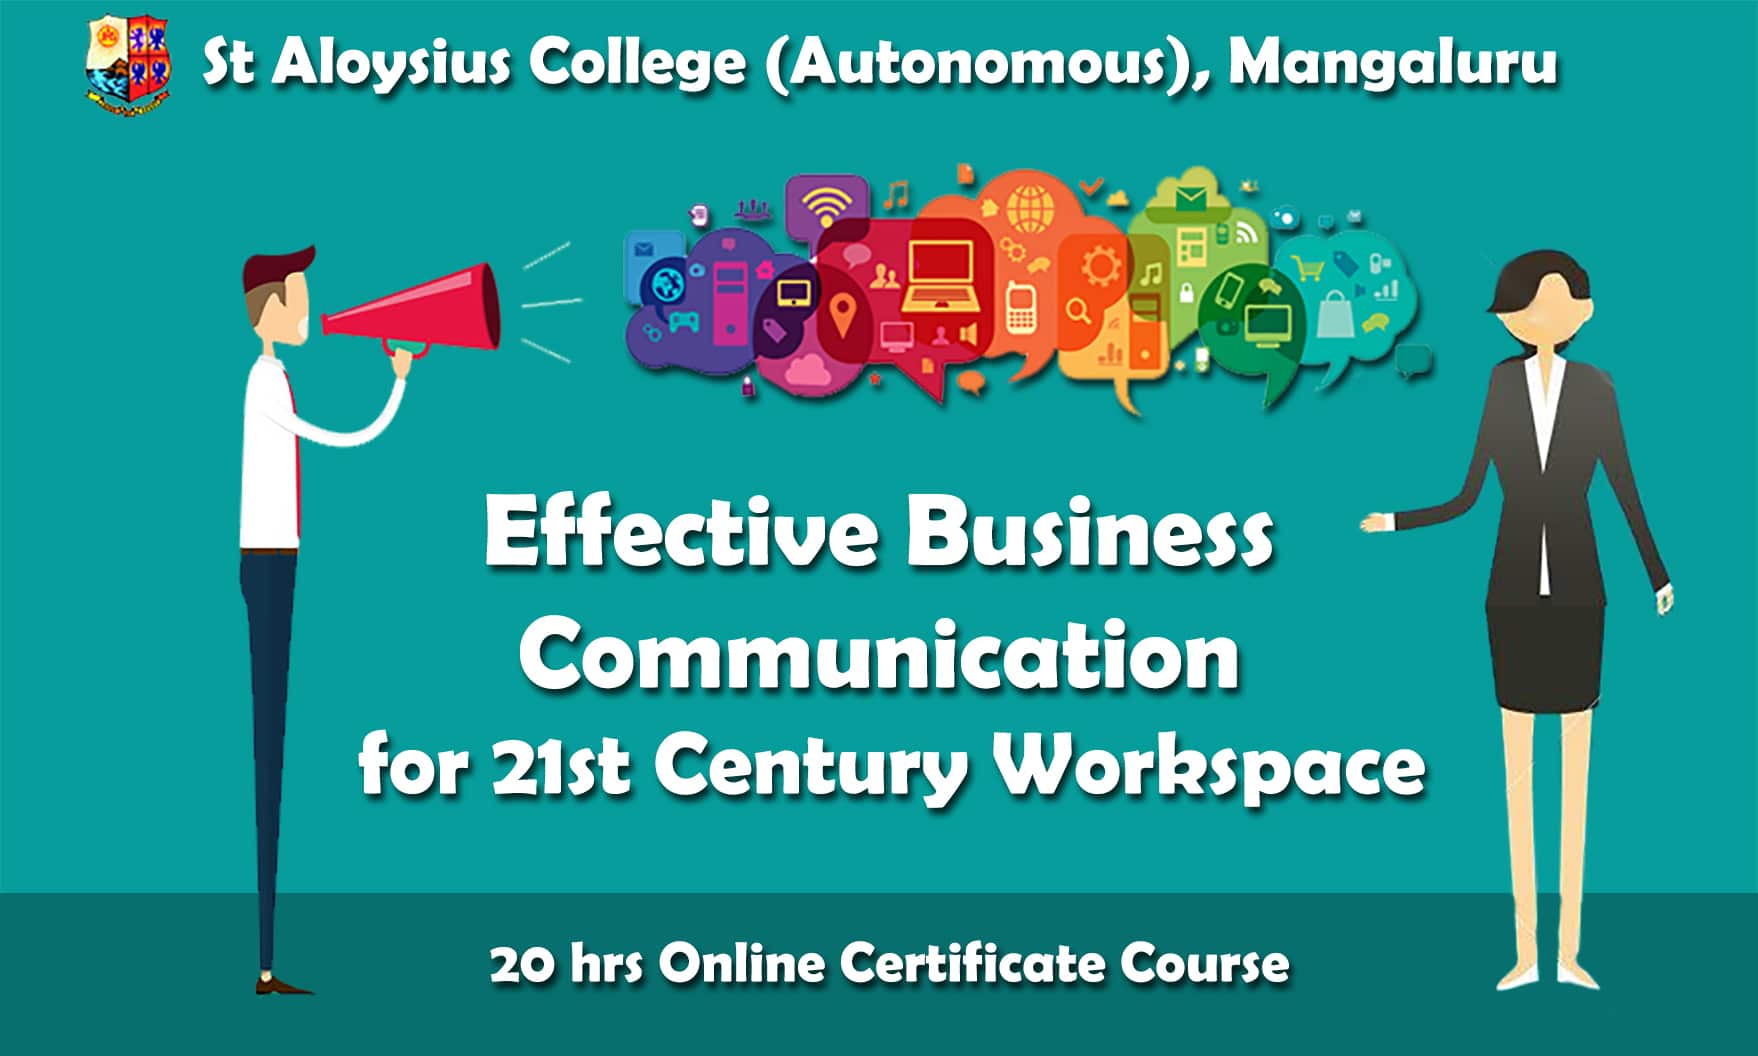 Effective Business Communication for 21st Century Workspace